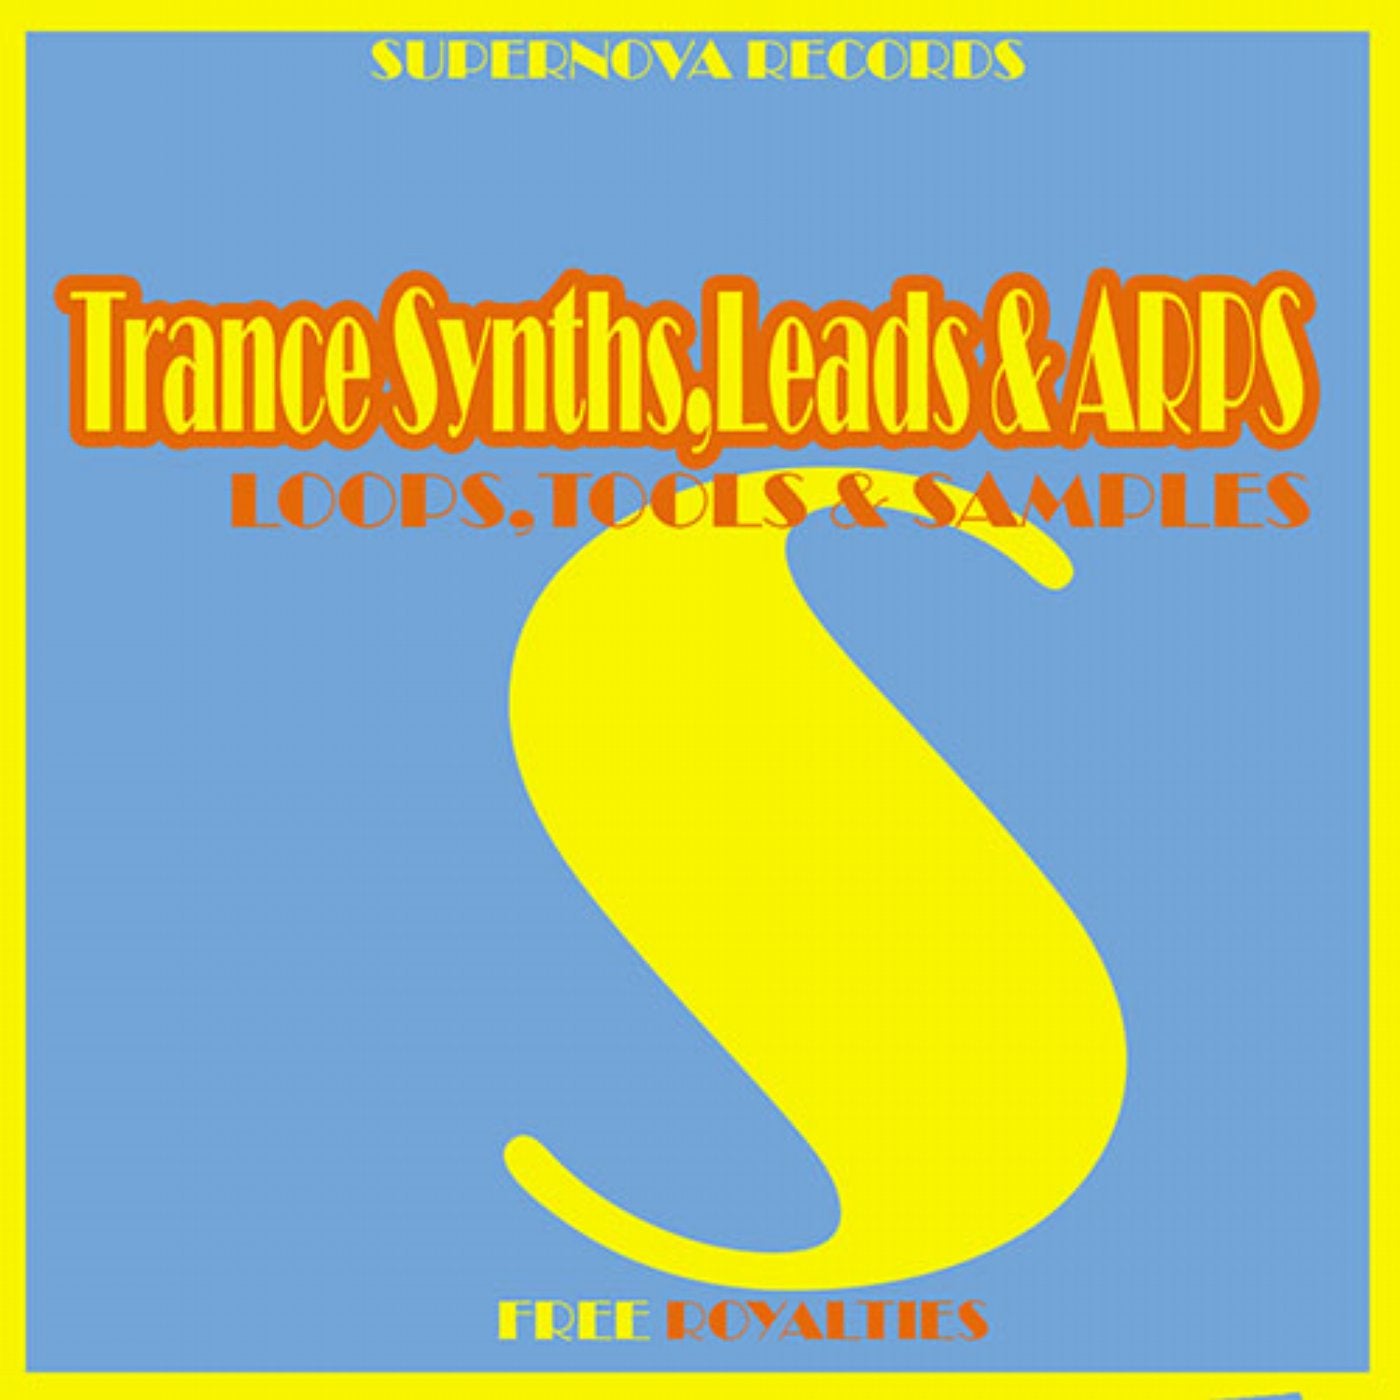 Trance Synths,Leads & ARPS